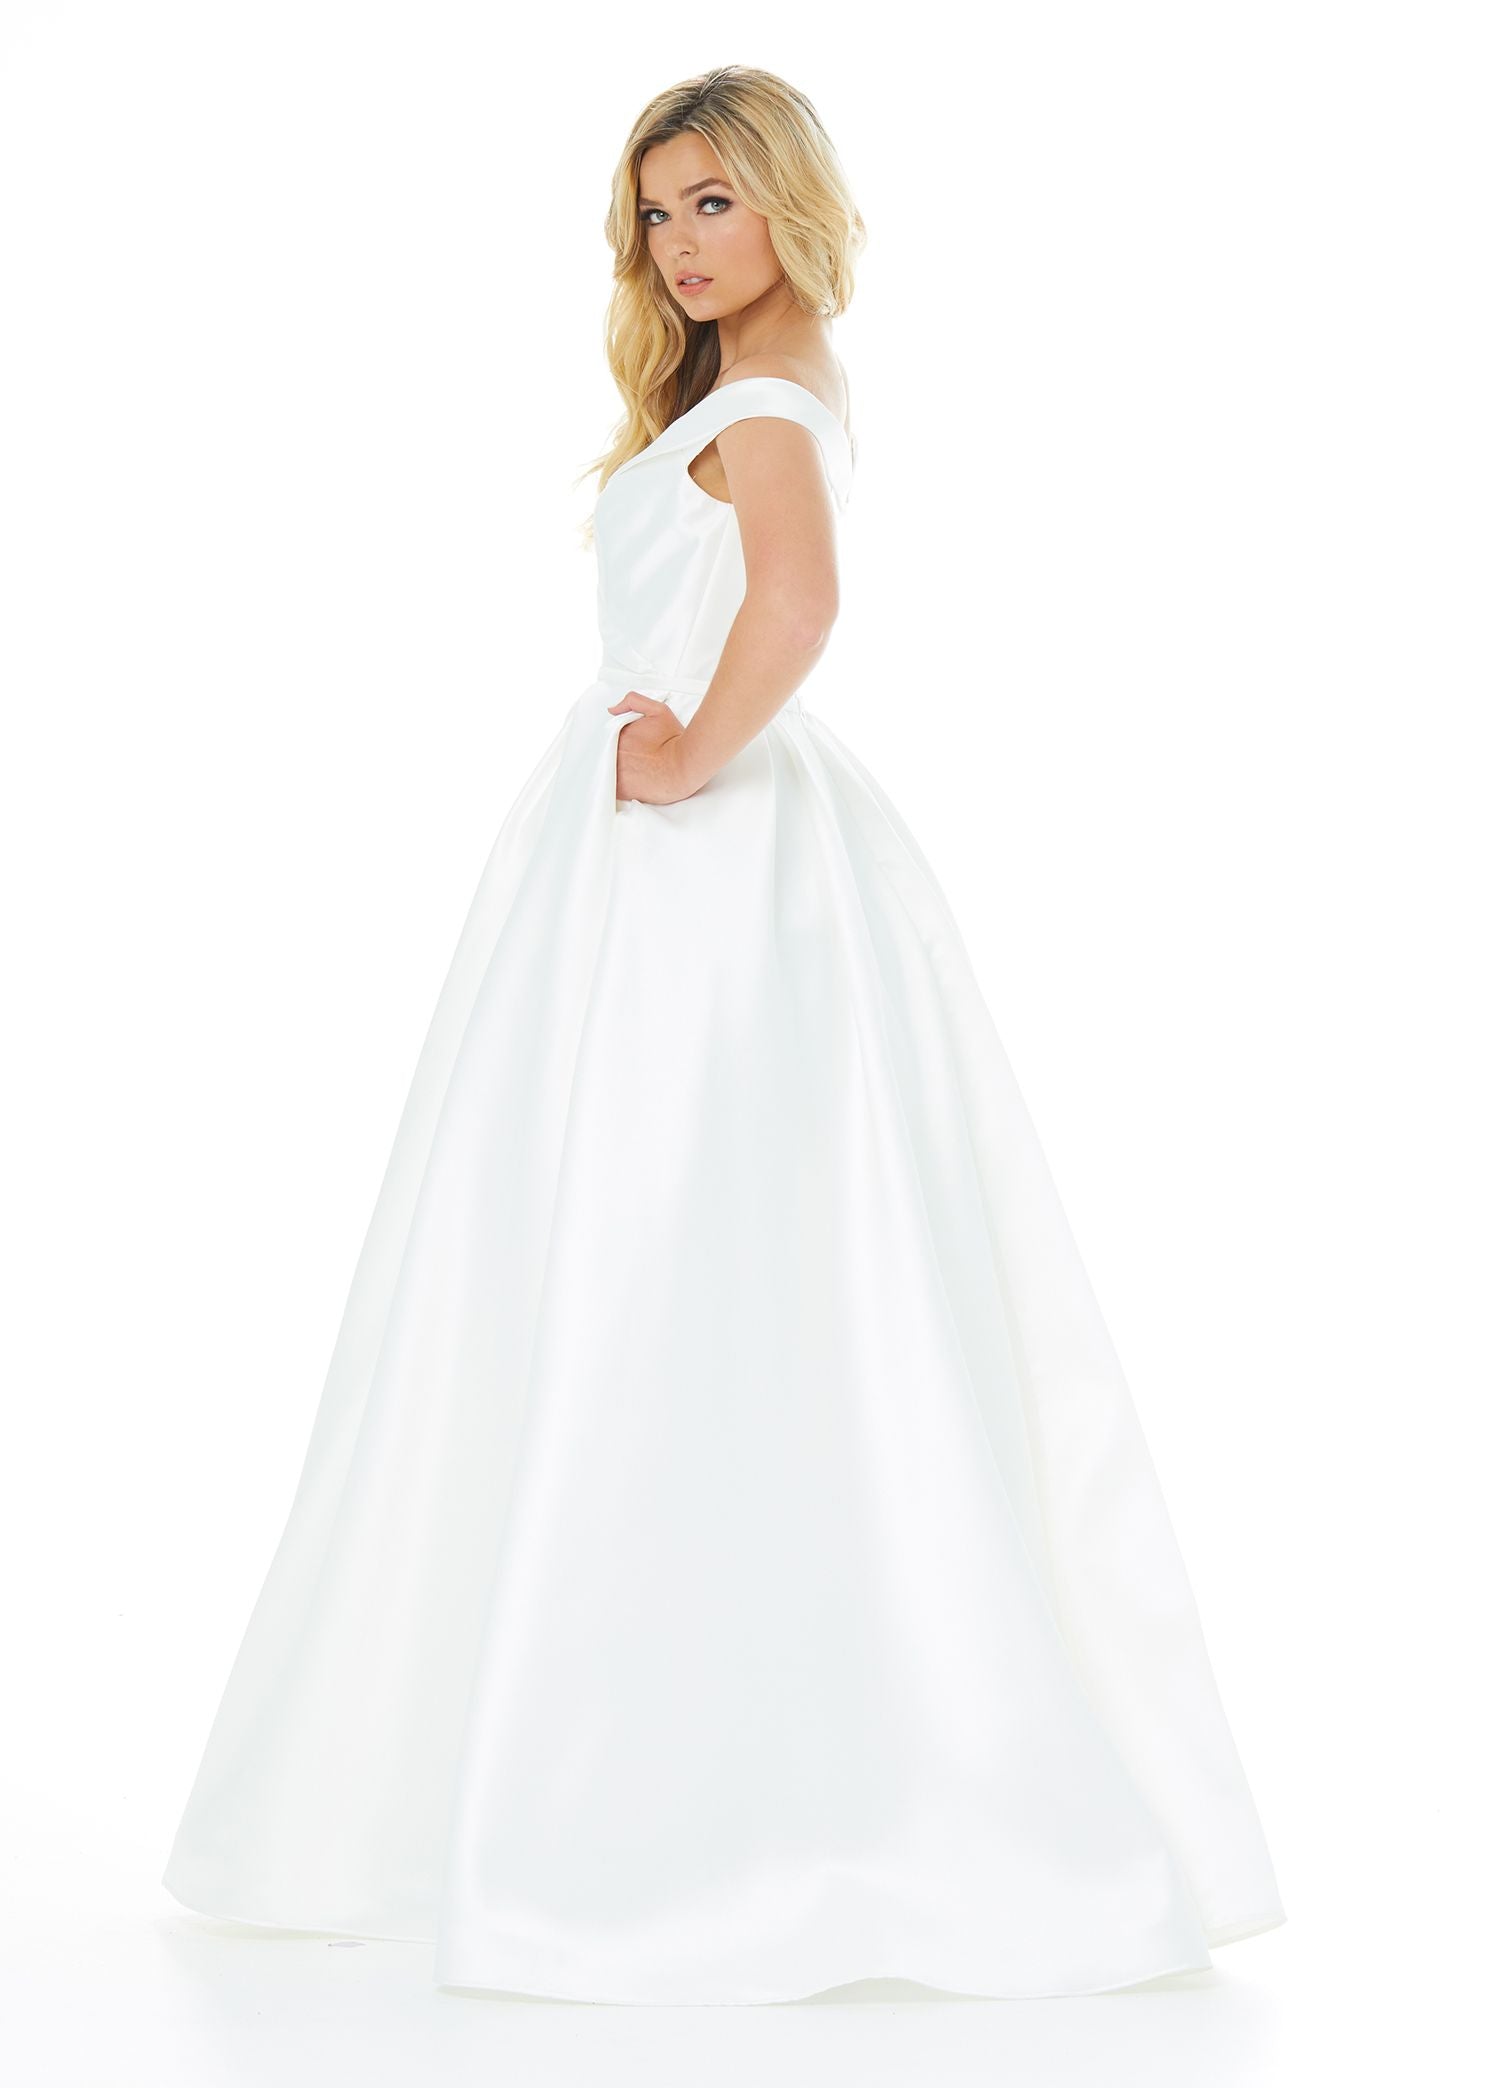 Ashley Lauren 1966 off the shoulder mikado a line simple wedding dress ball gown ivory evening gown or prom dress pageant gown.  Ivory size 22  Available colors:  Ivory  Available sizes:  0, 2, 4, 6, 8, 10, 12, 14, 16, 18, 20, 22  Simple and stunning mikado ball gown featuring an off the shoulder wrap detail. The A-Line skirt is completed with box pleats and pockets.  Mikado Off Shoulder A-Line Silhouette Pockets